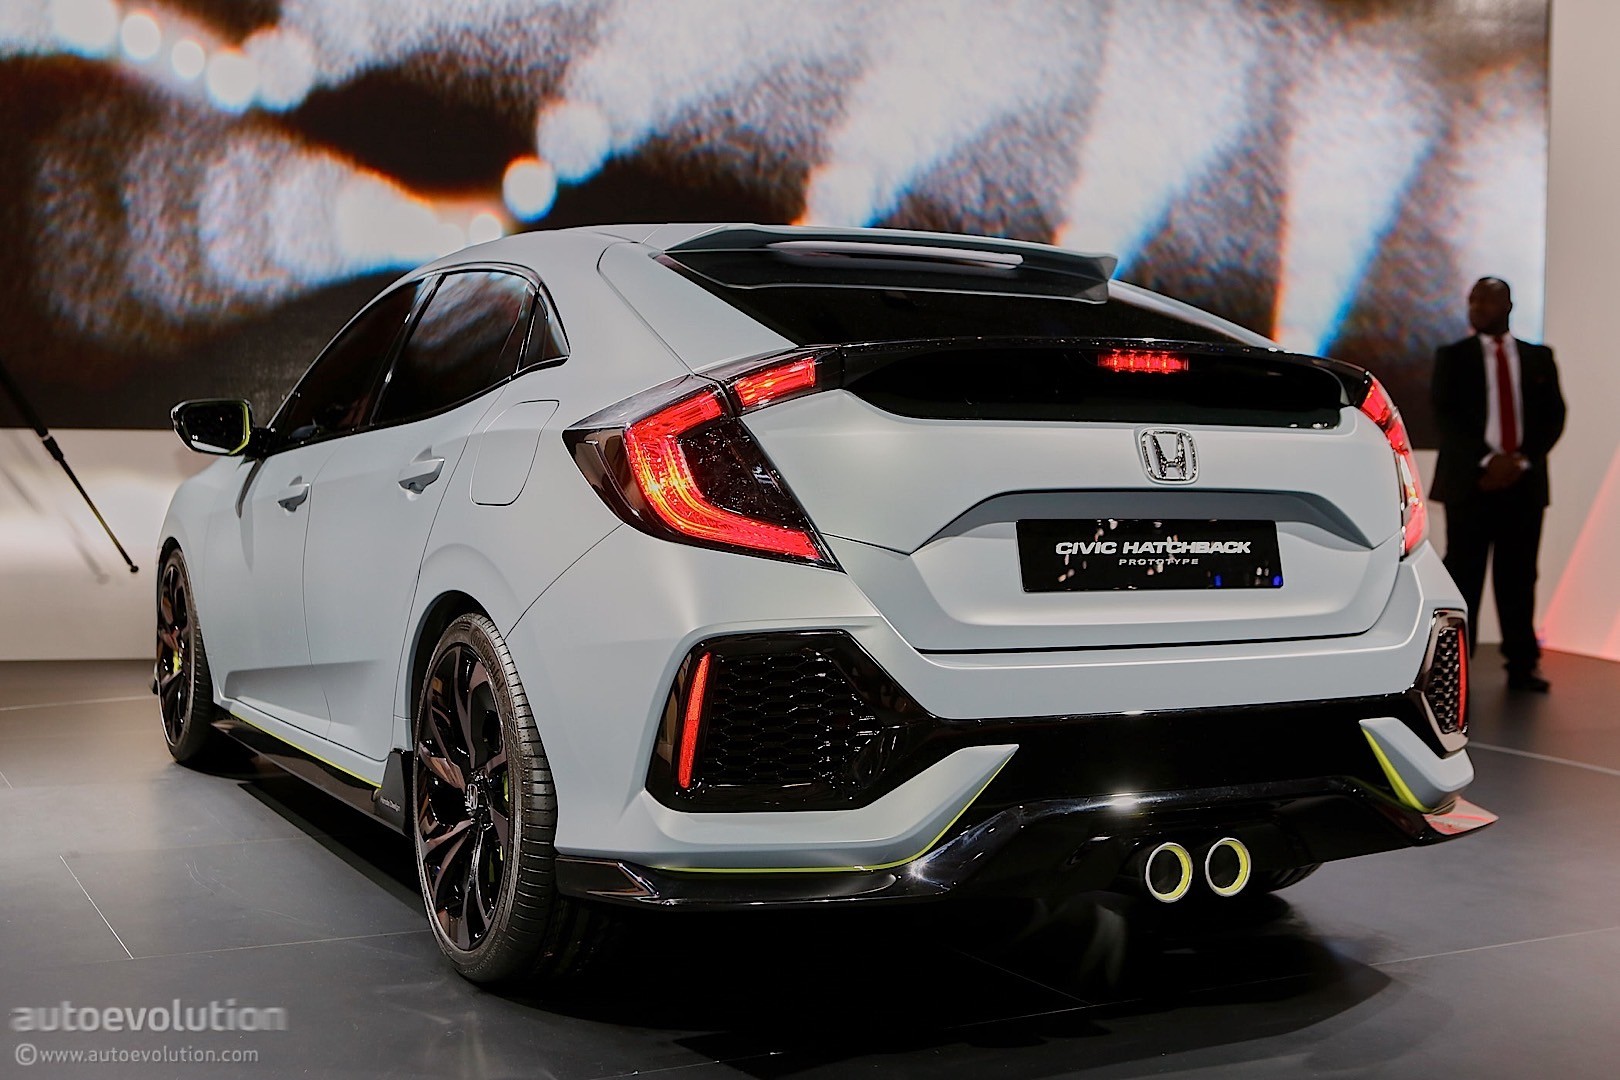 honda-civic-hatchback-coming-to-new-york-civic-si-and-new-type-r-in-2017_18.jpg